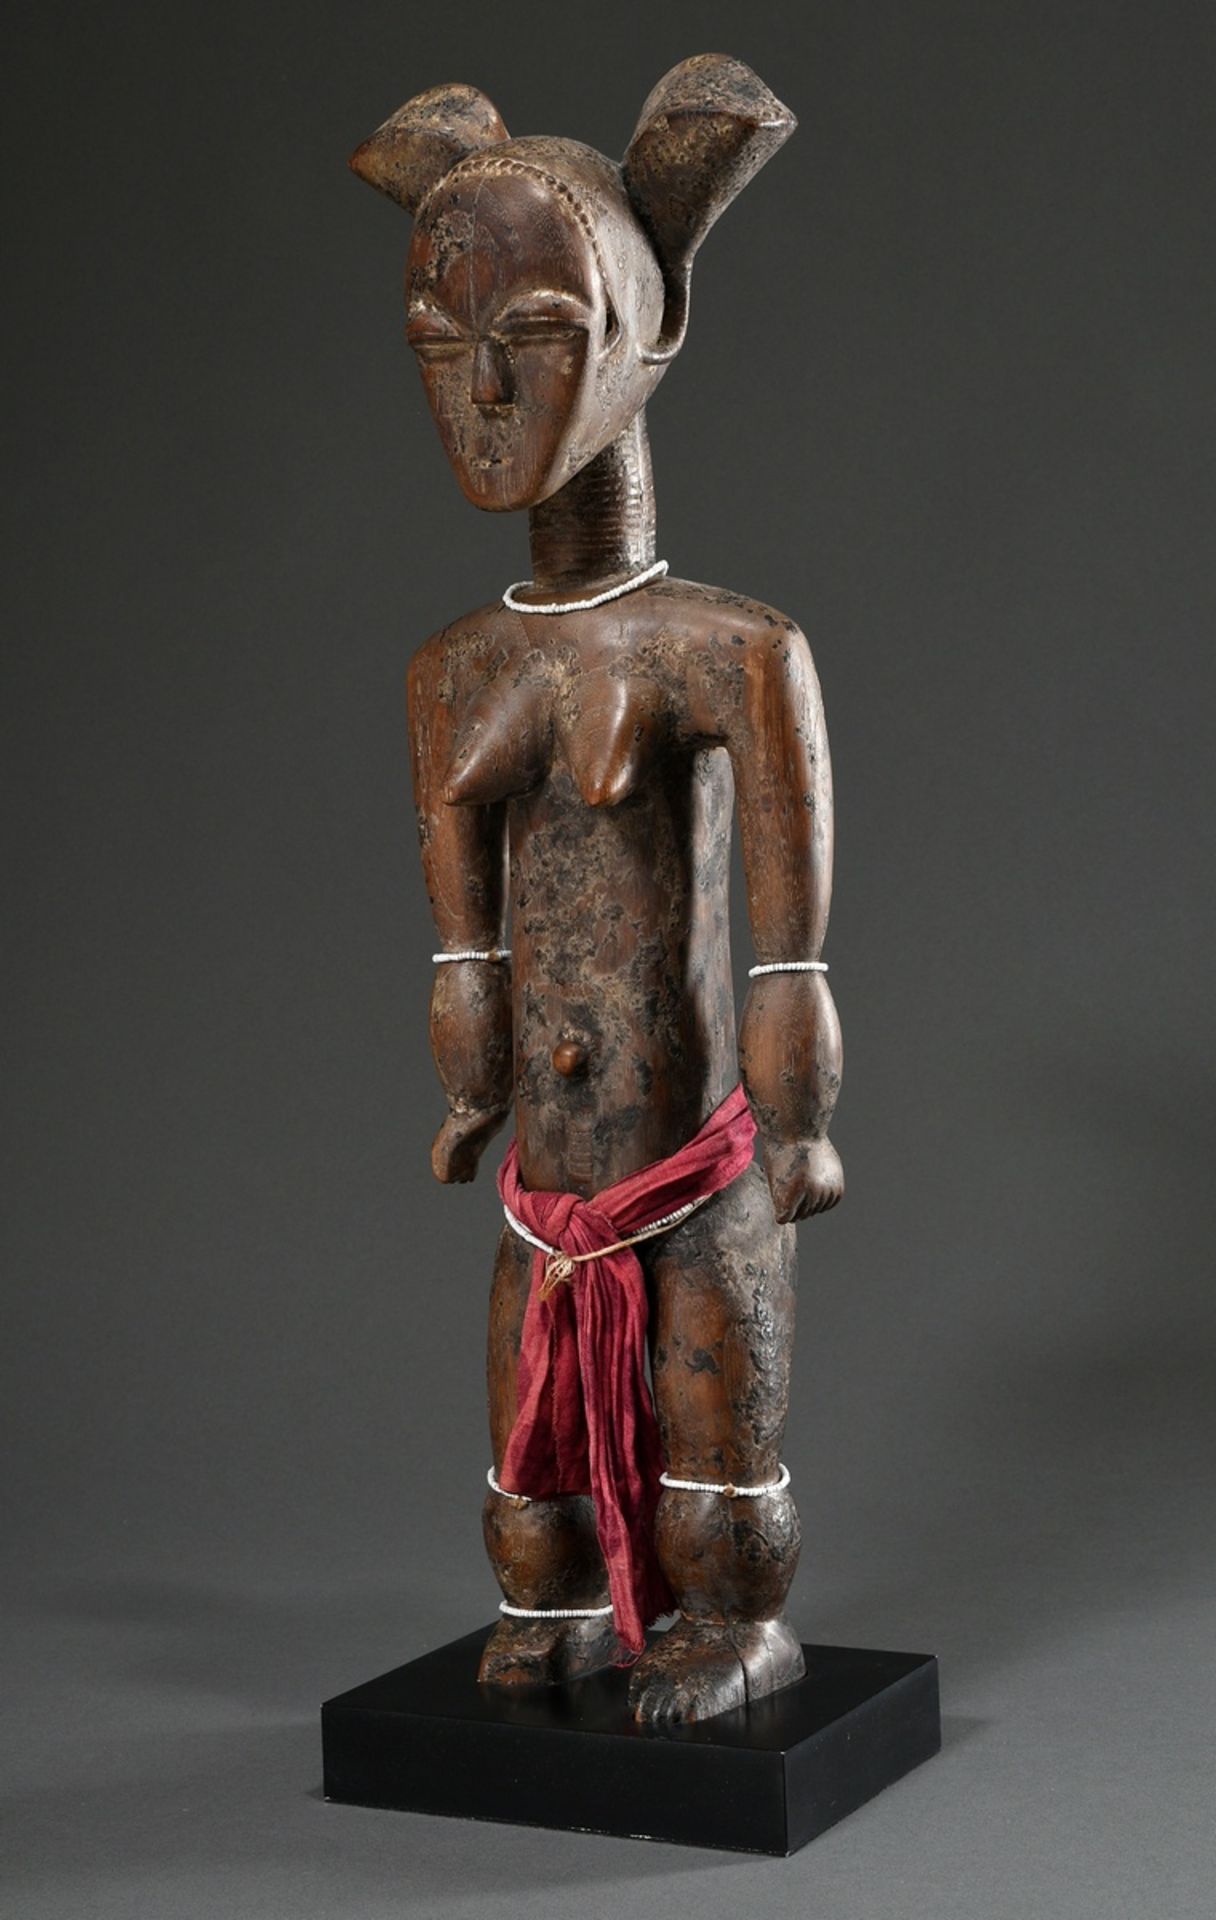 Attie female figure or fertility fetish with fanciful coiffure and scarification marks as well as p